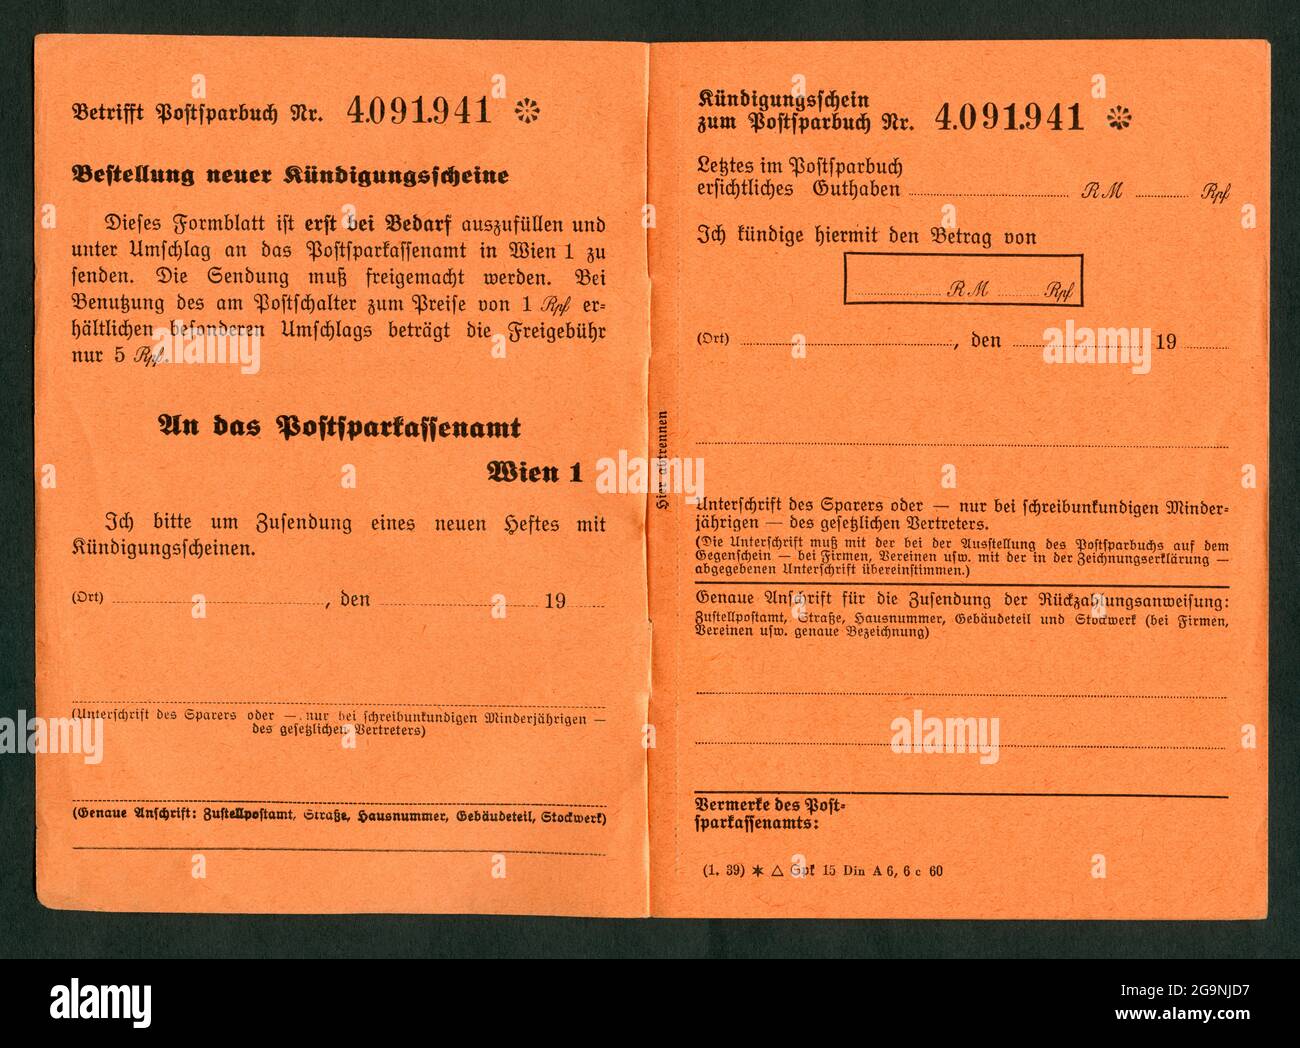 Vienna, German Reichspost, postal savings book, page 2 and 3 of the savings book, repayment document, ADDITIONAL-RIGHTS-CLEARANCE-INFO-NOT-AVAILABLE Stock Photo